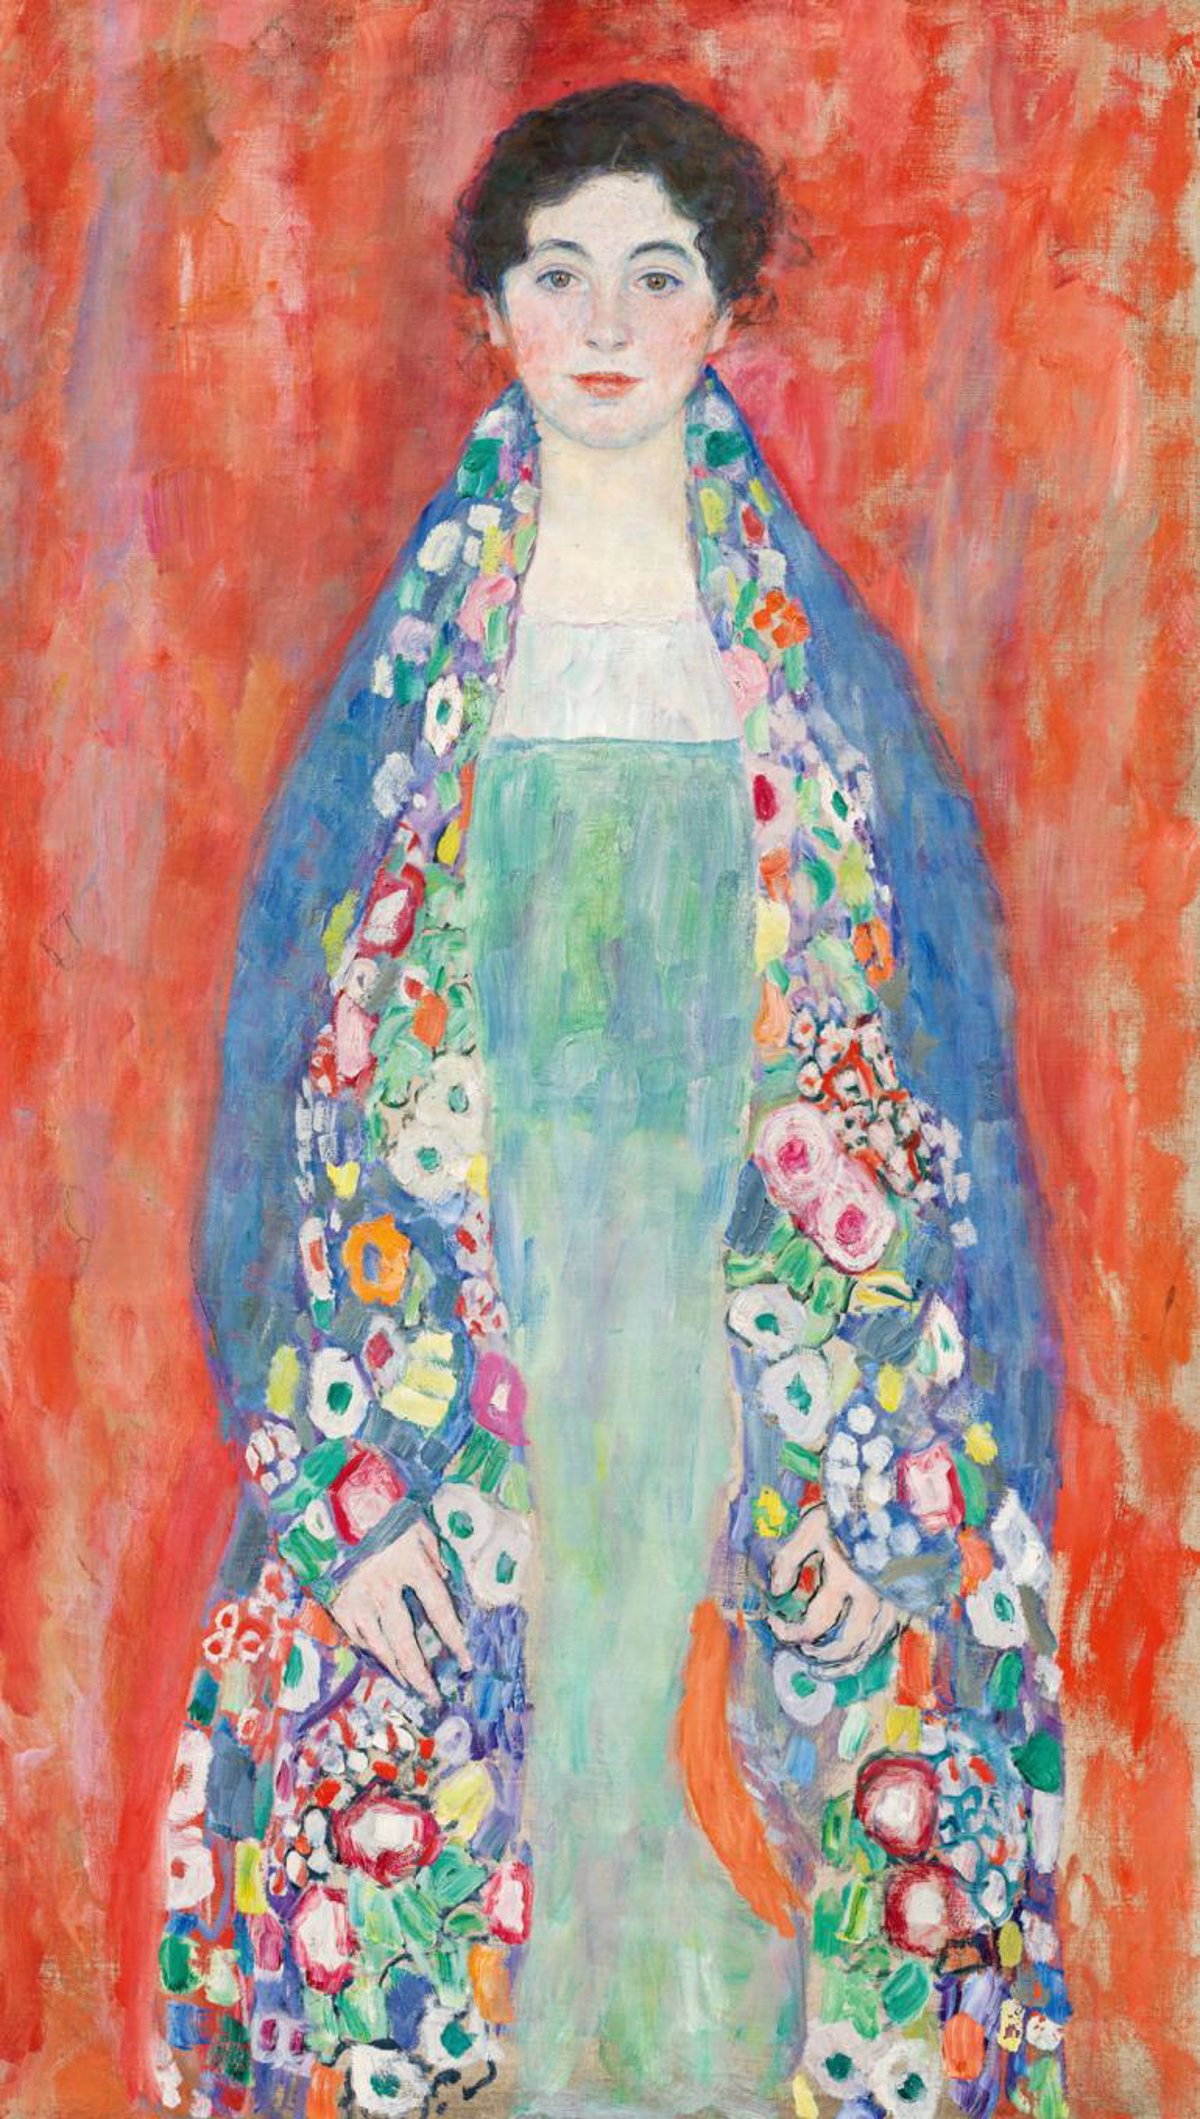 A Klimt painting that was thought to have been lost sold for 30 million euros